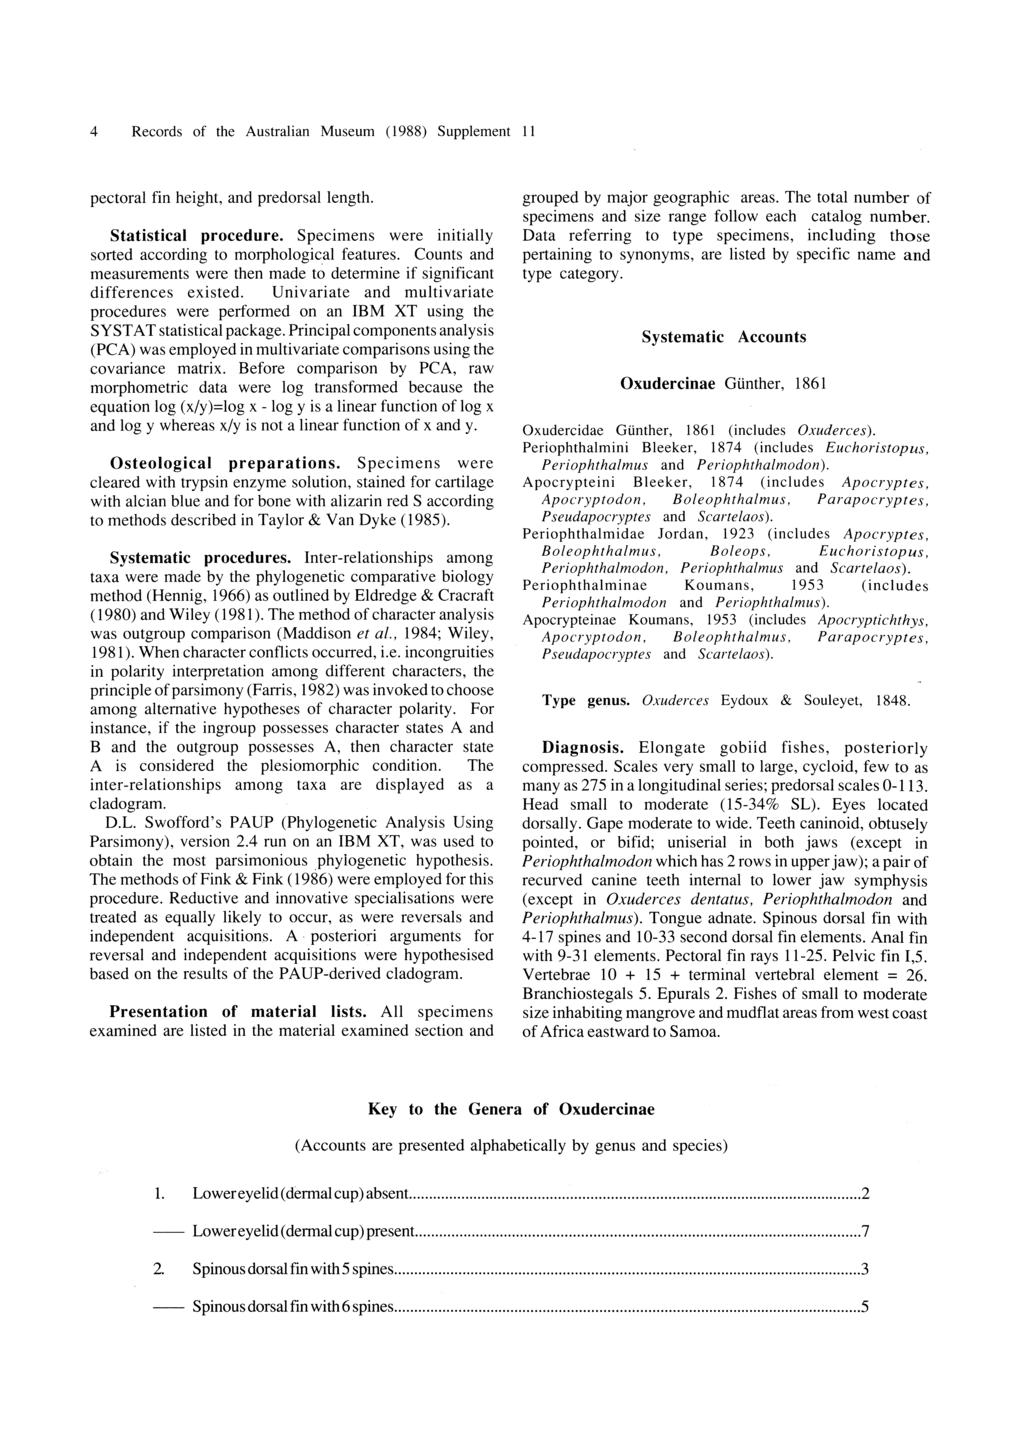 4 Records of the Australian Museum (1988) Supplement II pectoral fin height, and predorsal length. Statistical procedure. Specimens were initially sorted according to morphological features.